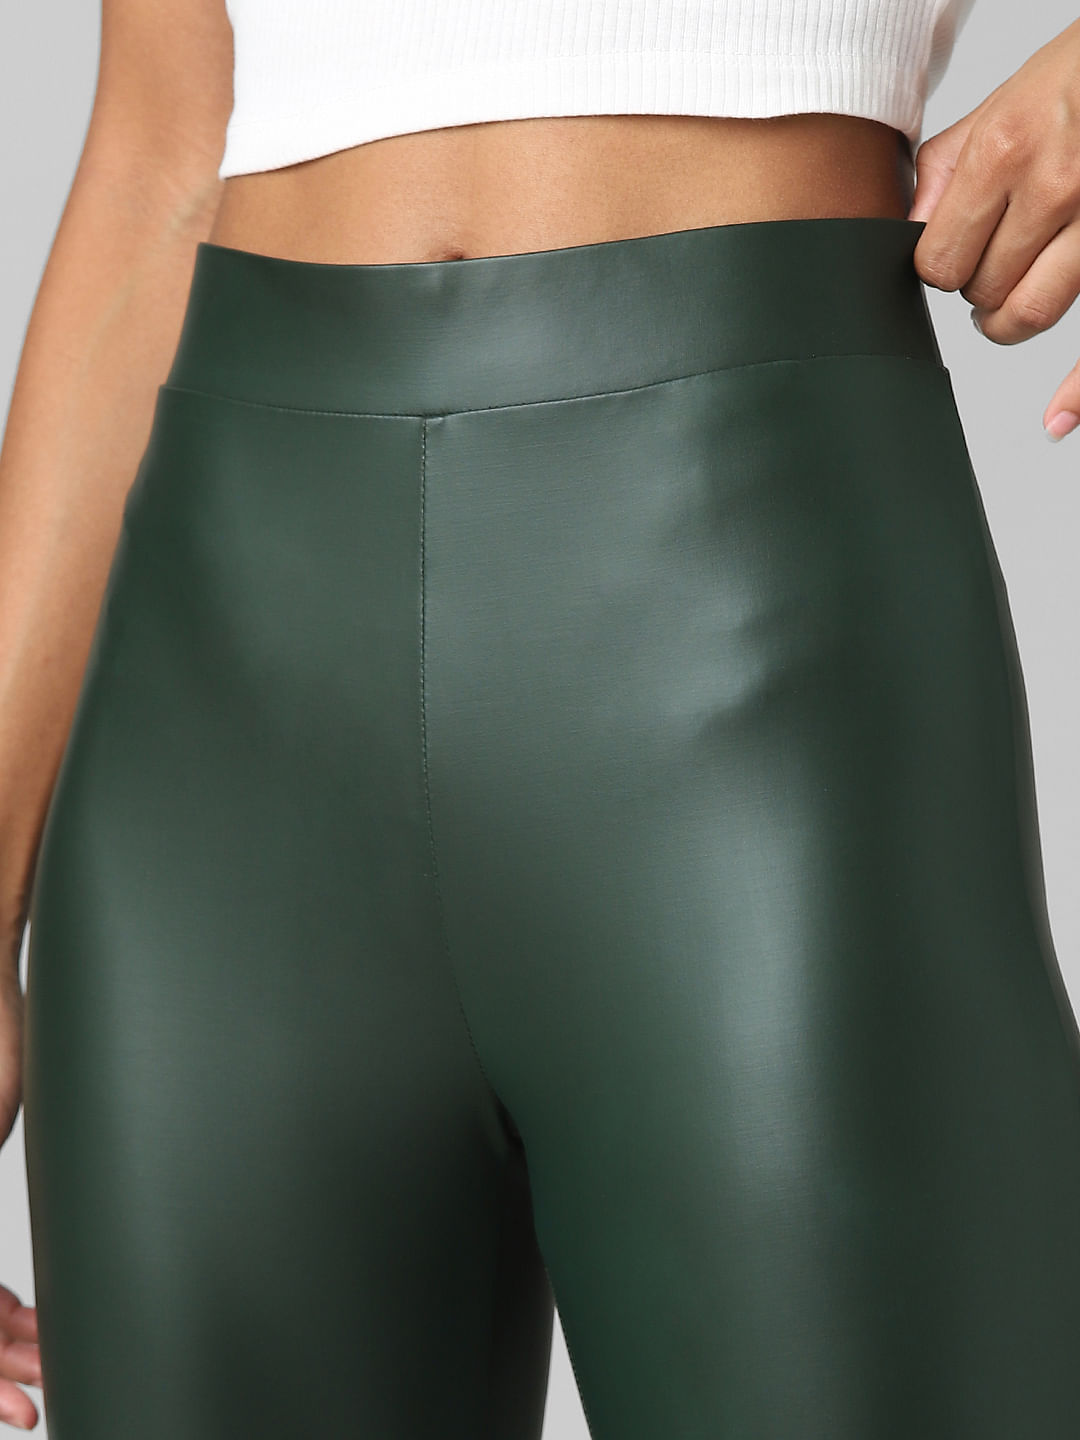 These Spanx Faux Leather Leggings Come With Me on Every Business Trip |  Condé Nast Traveler